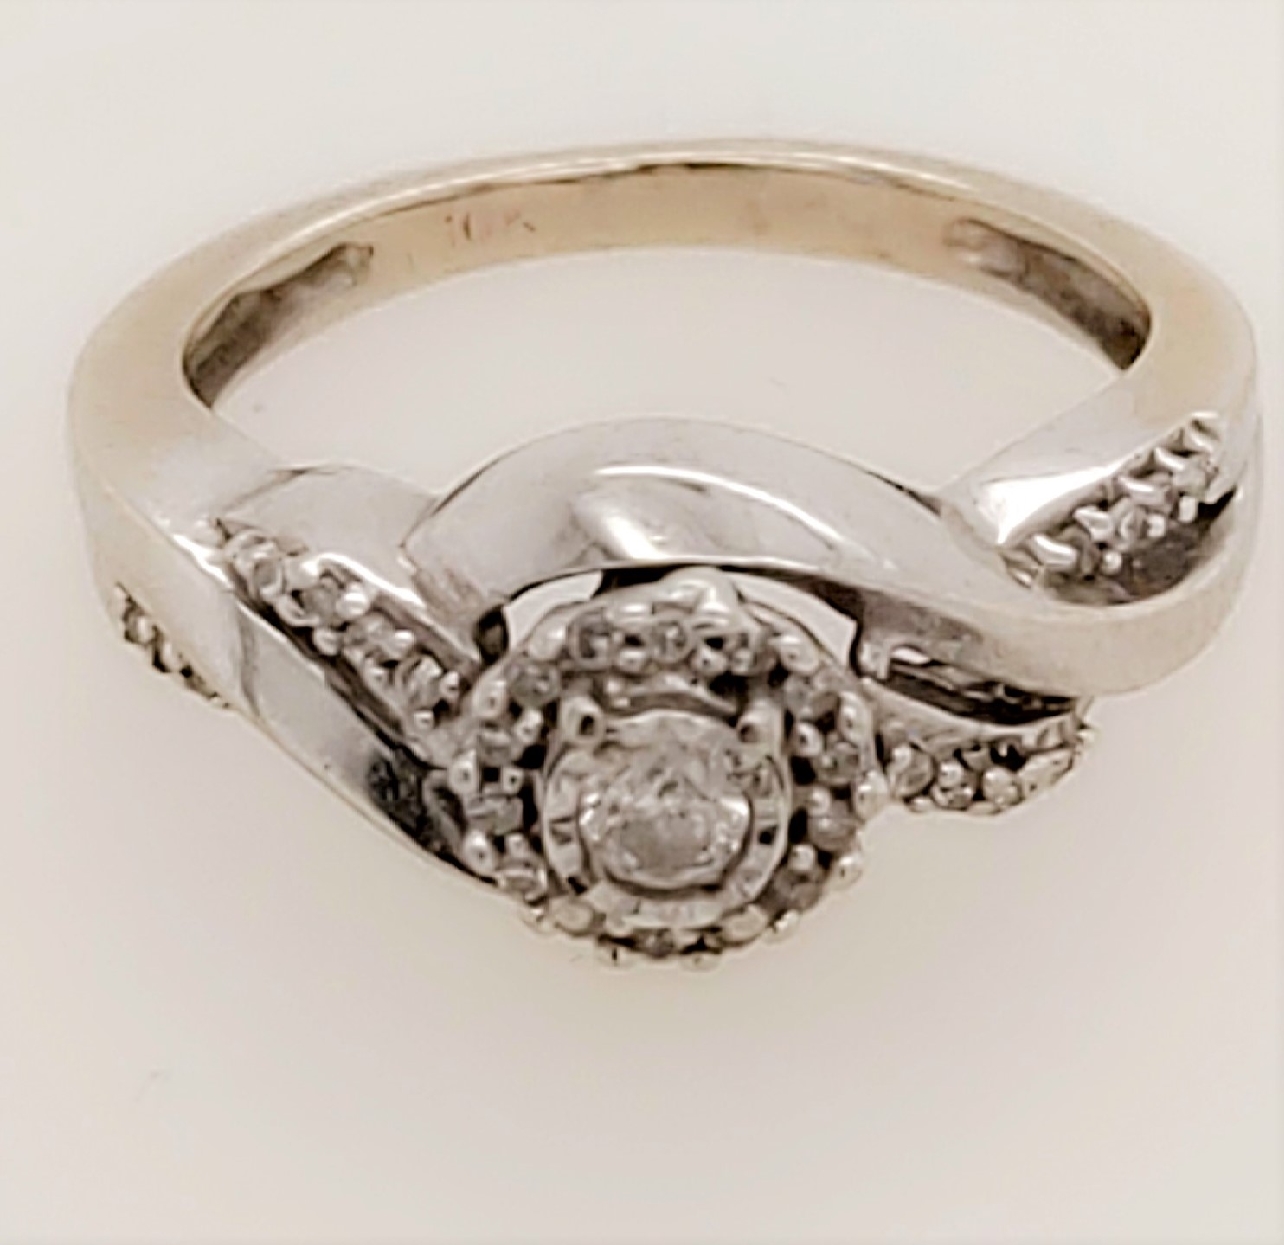 10K White Gold Promise Ring with Twisted Band Size 3